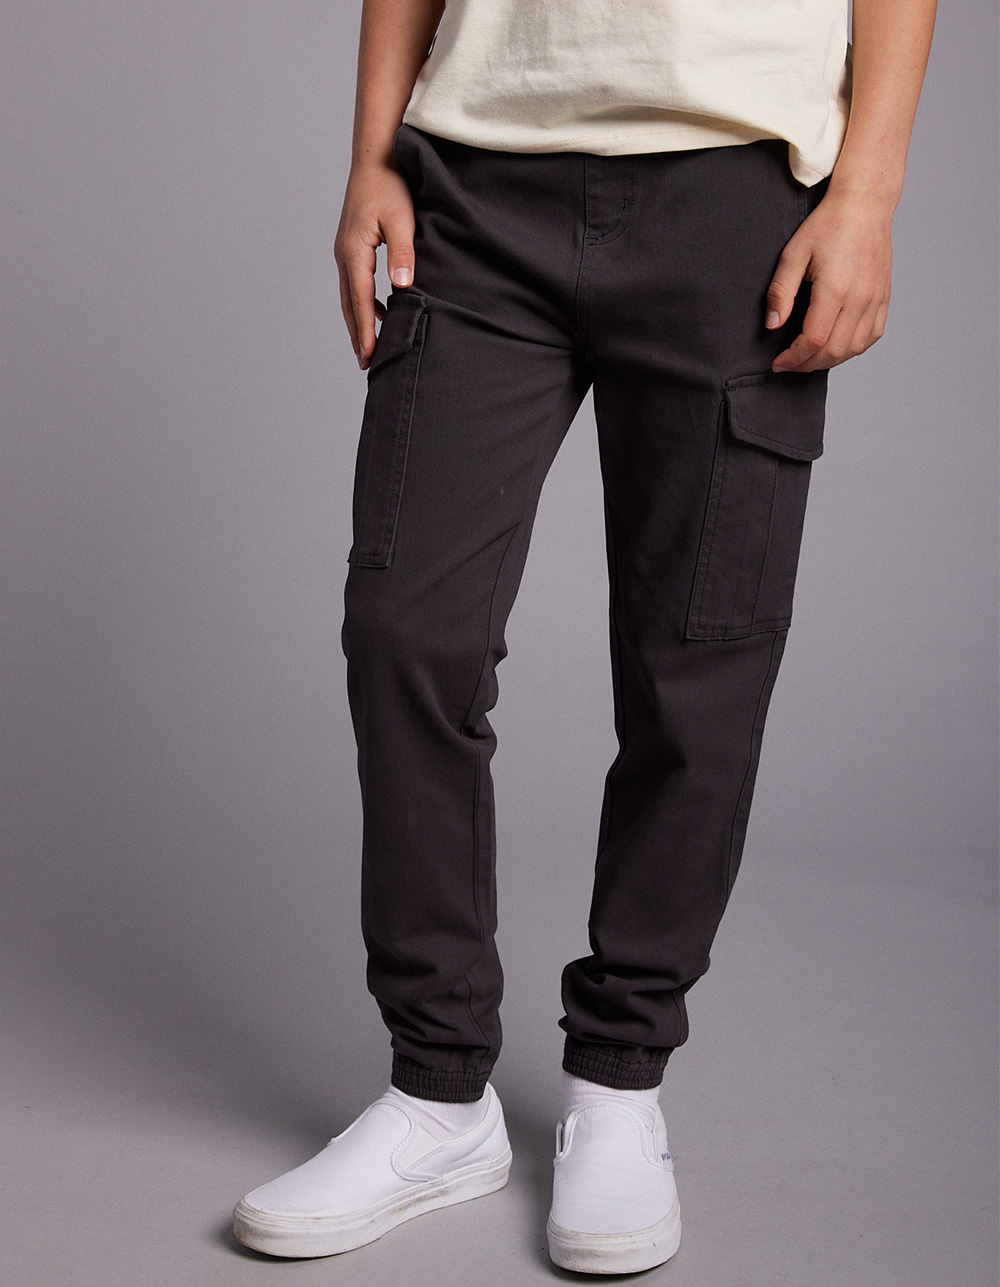  Rsq Boys Twill Jogger Pants Black: Clothing, Shoes & Jewelry